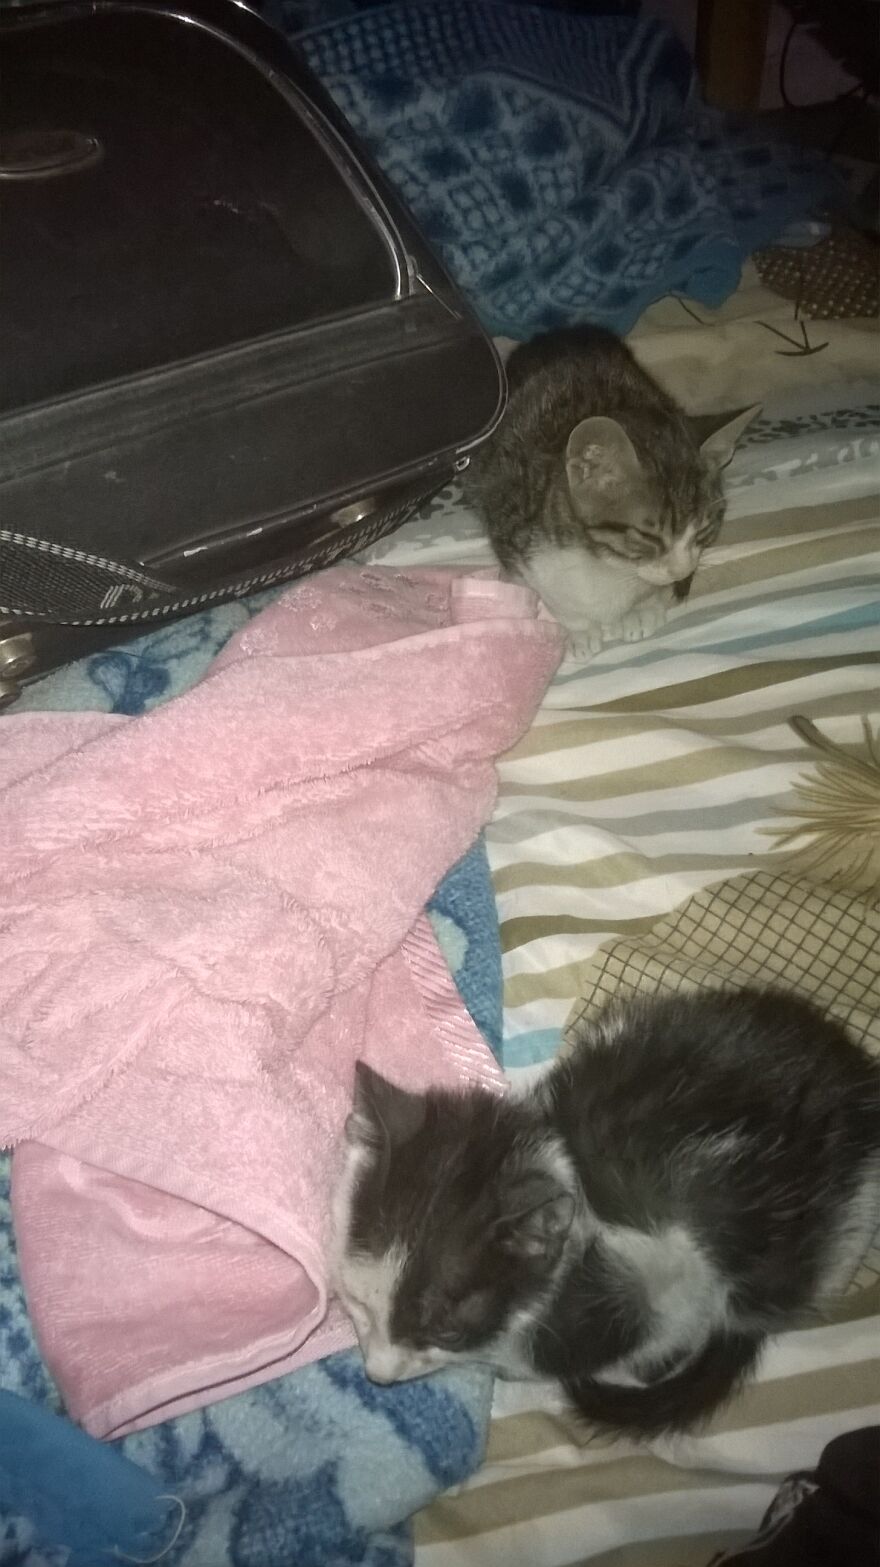 Street Cats On My Bed At A Cold Night In Egypt.